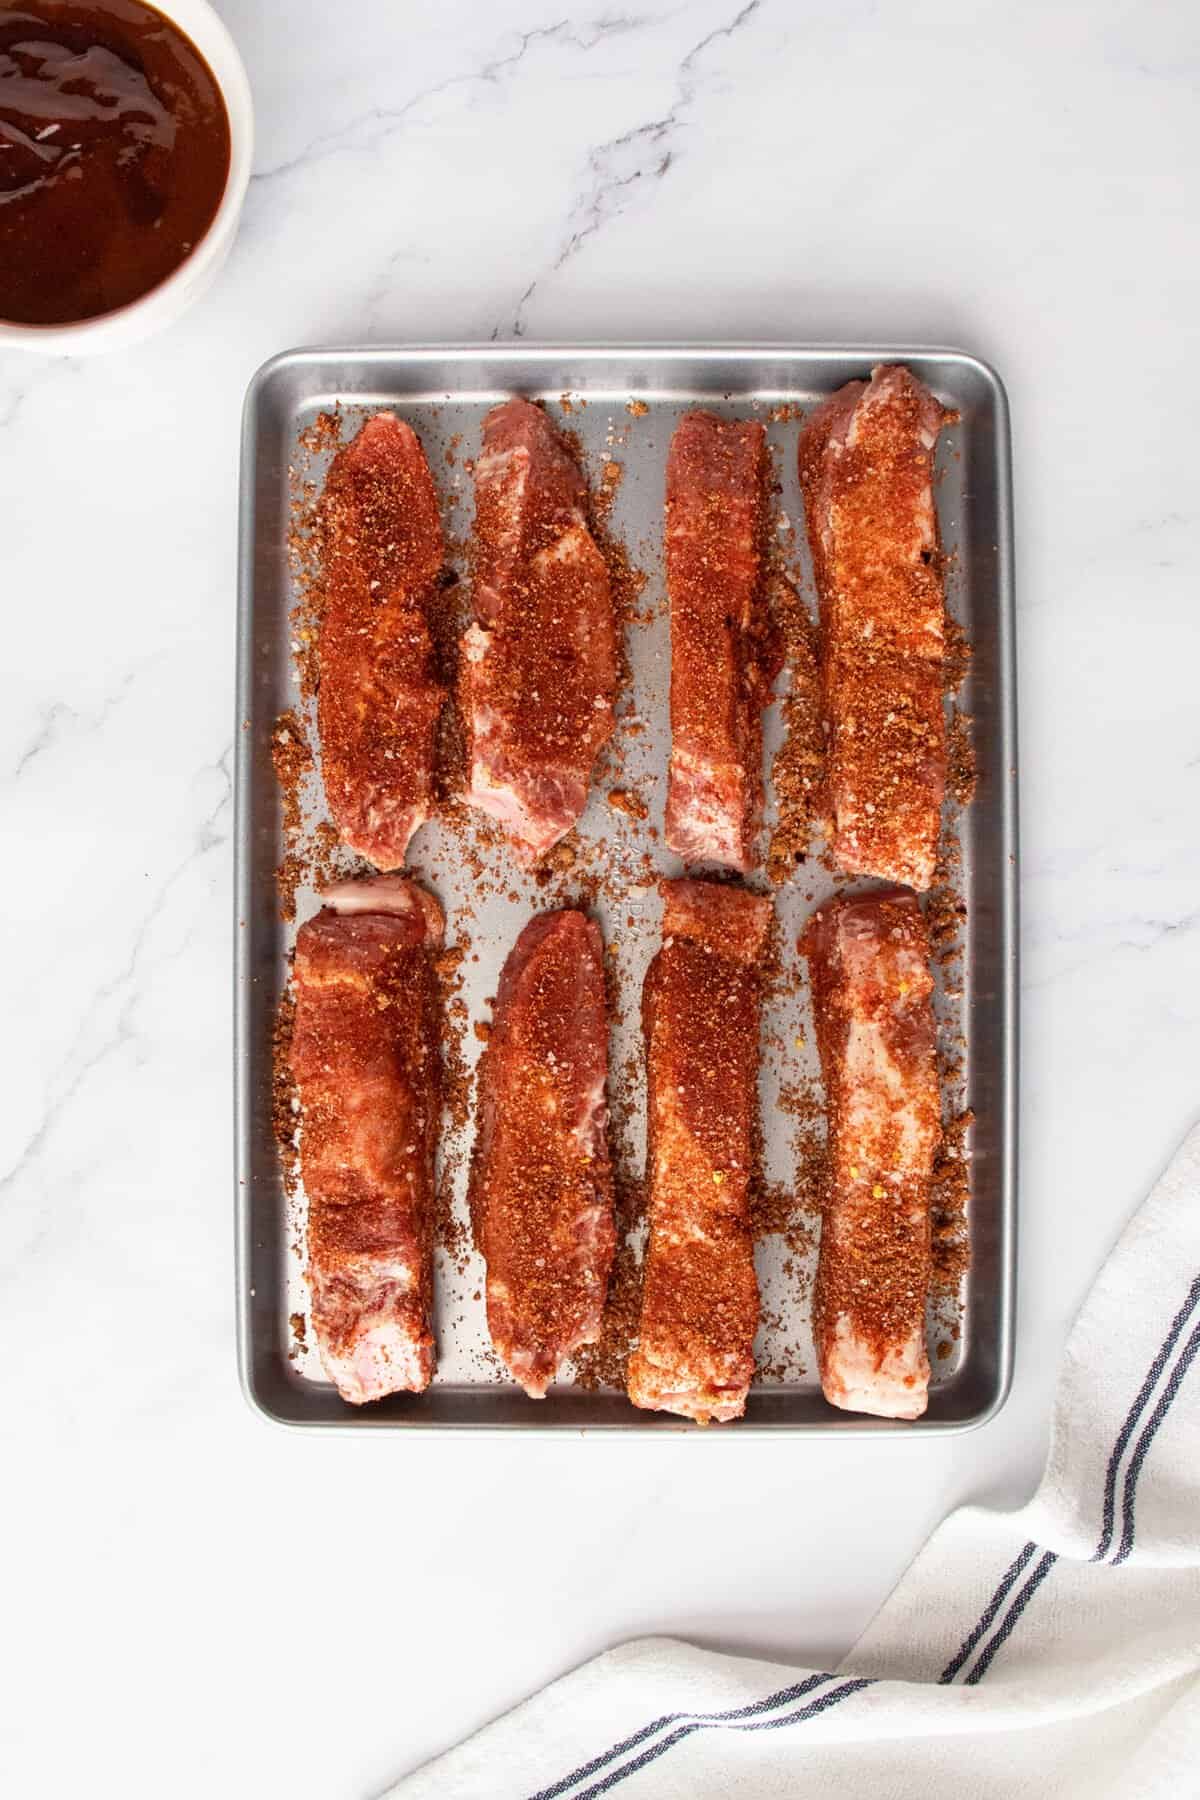 Country style ribs on baking sheet